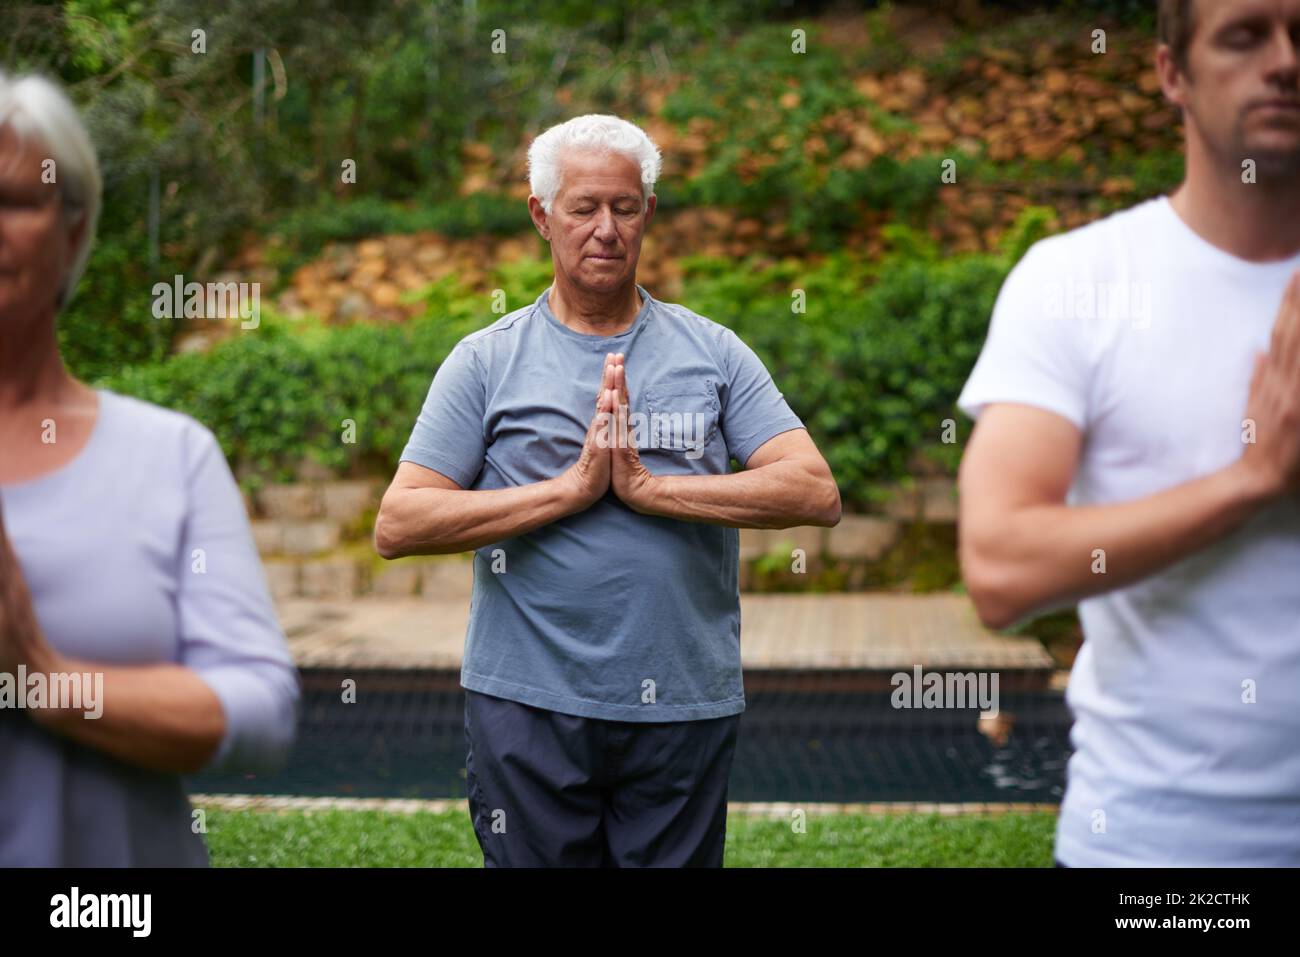 Deeply connected to his spirituality. Shot of a senior man meditating in an outdoor yoga class. Stock Photo